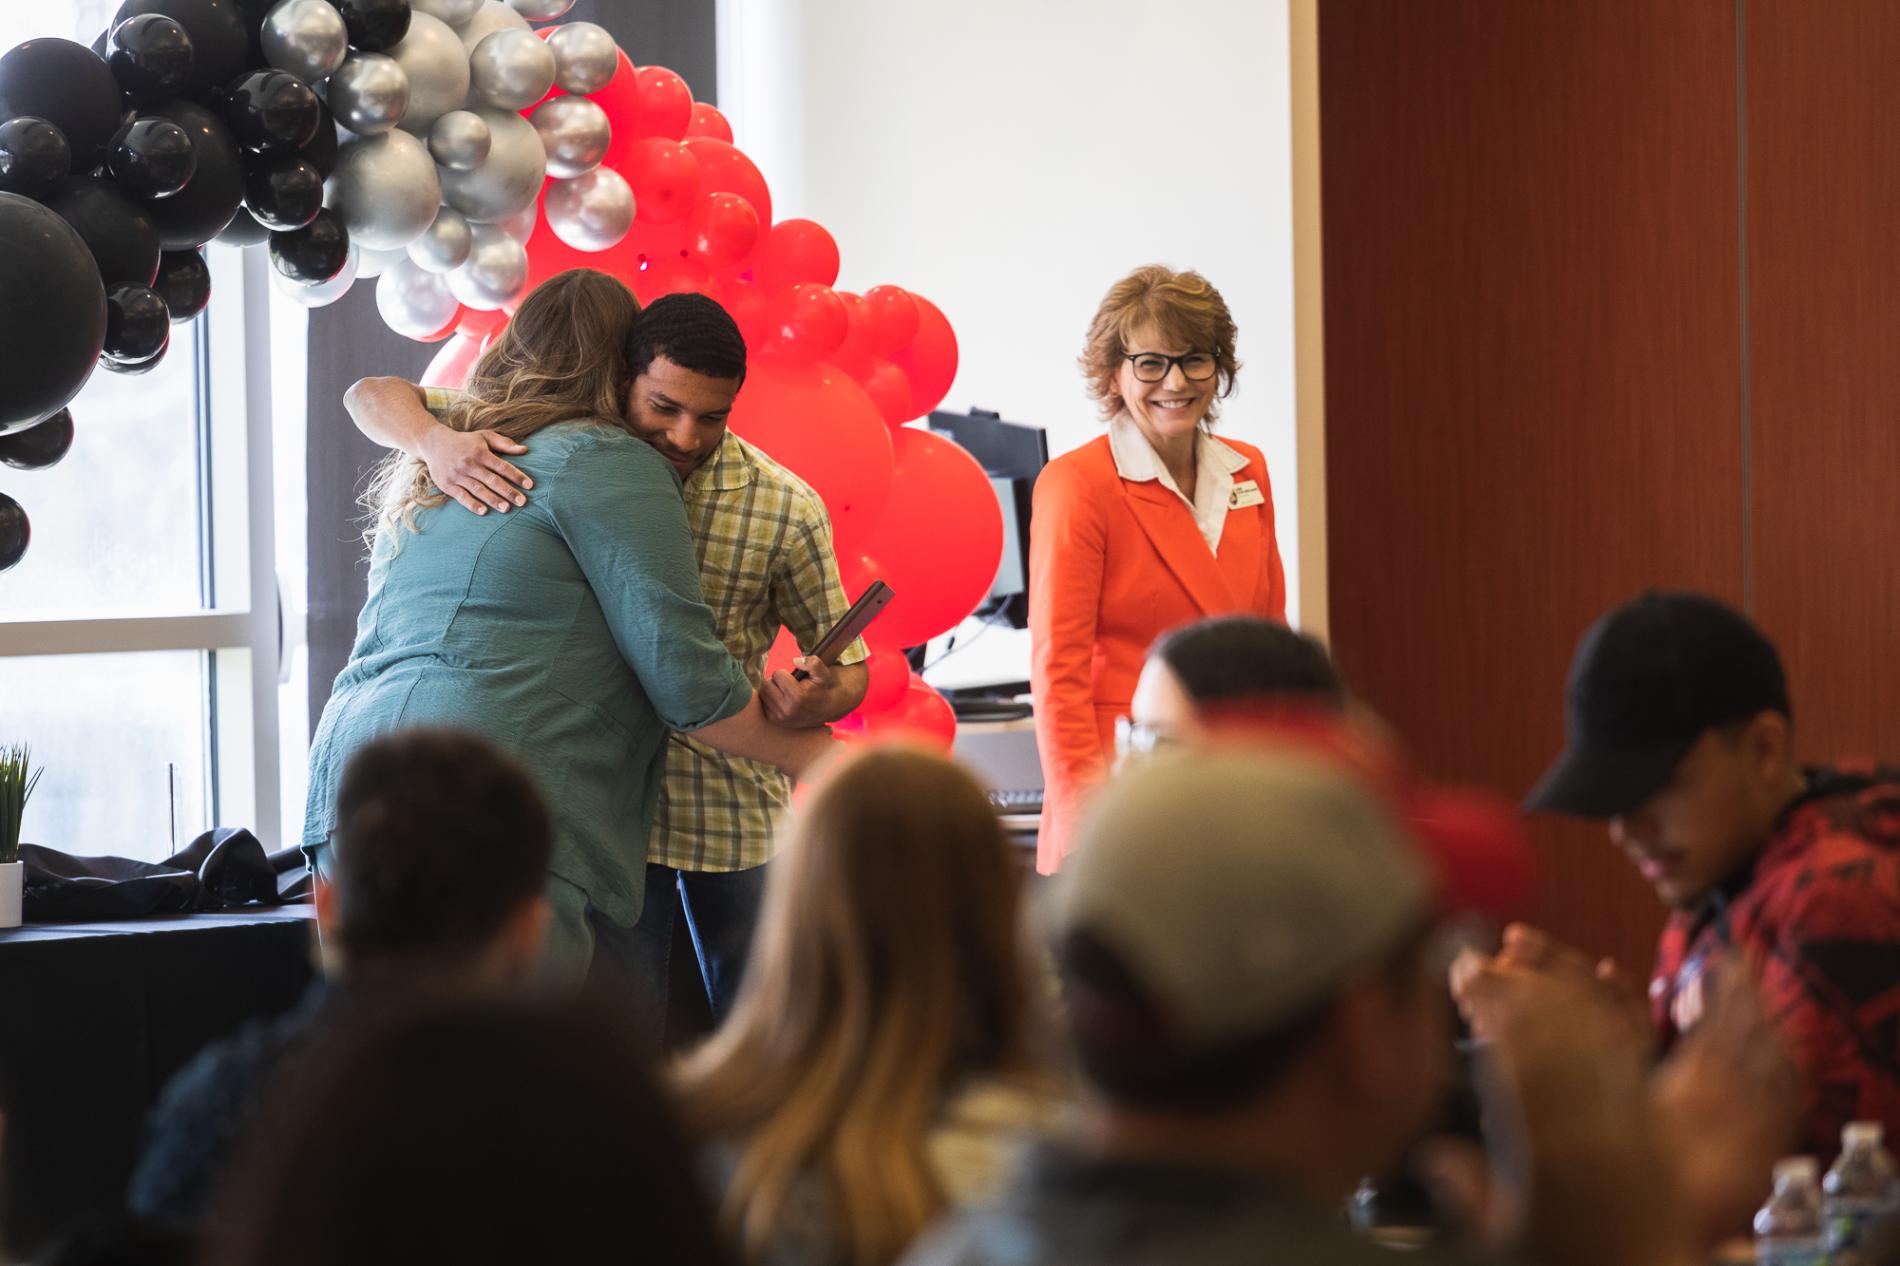 Senior Arian Alai, wearing a green plaid shirt, hugs Jill Kline, wearing a teal jacket, in front of a black, silver and red balloon arch. In the foreground, students and their families are seated, with only Arian and Jill in focus.